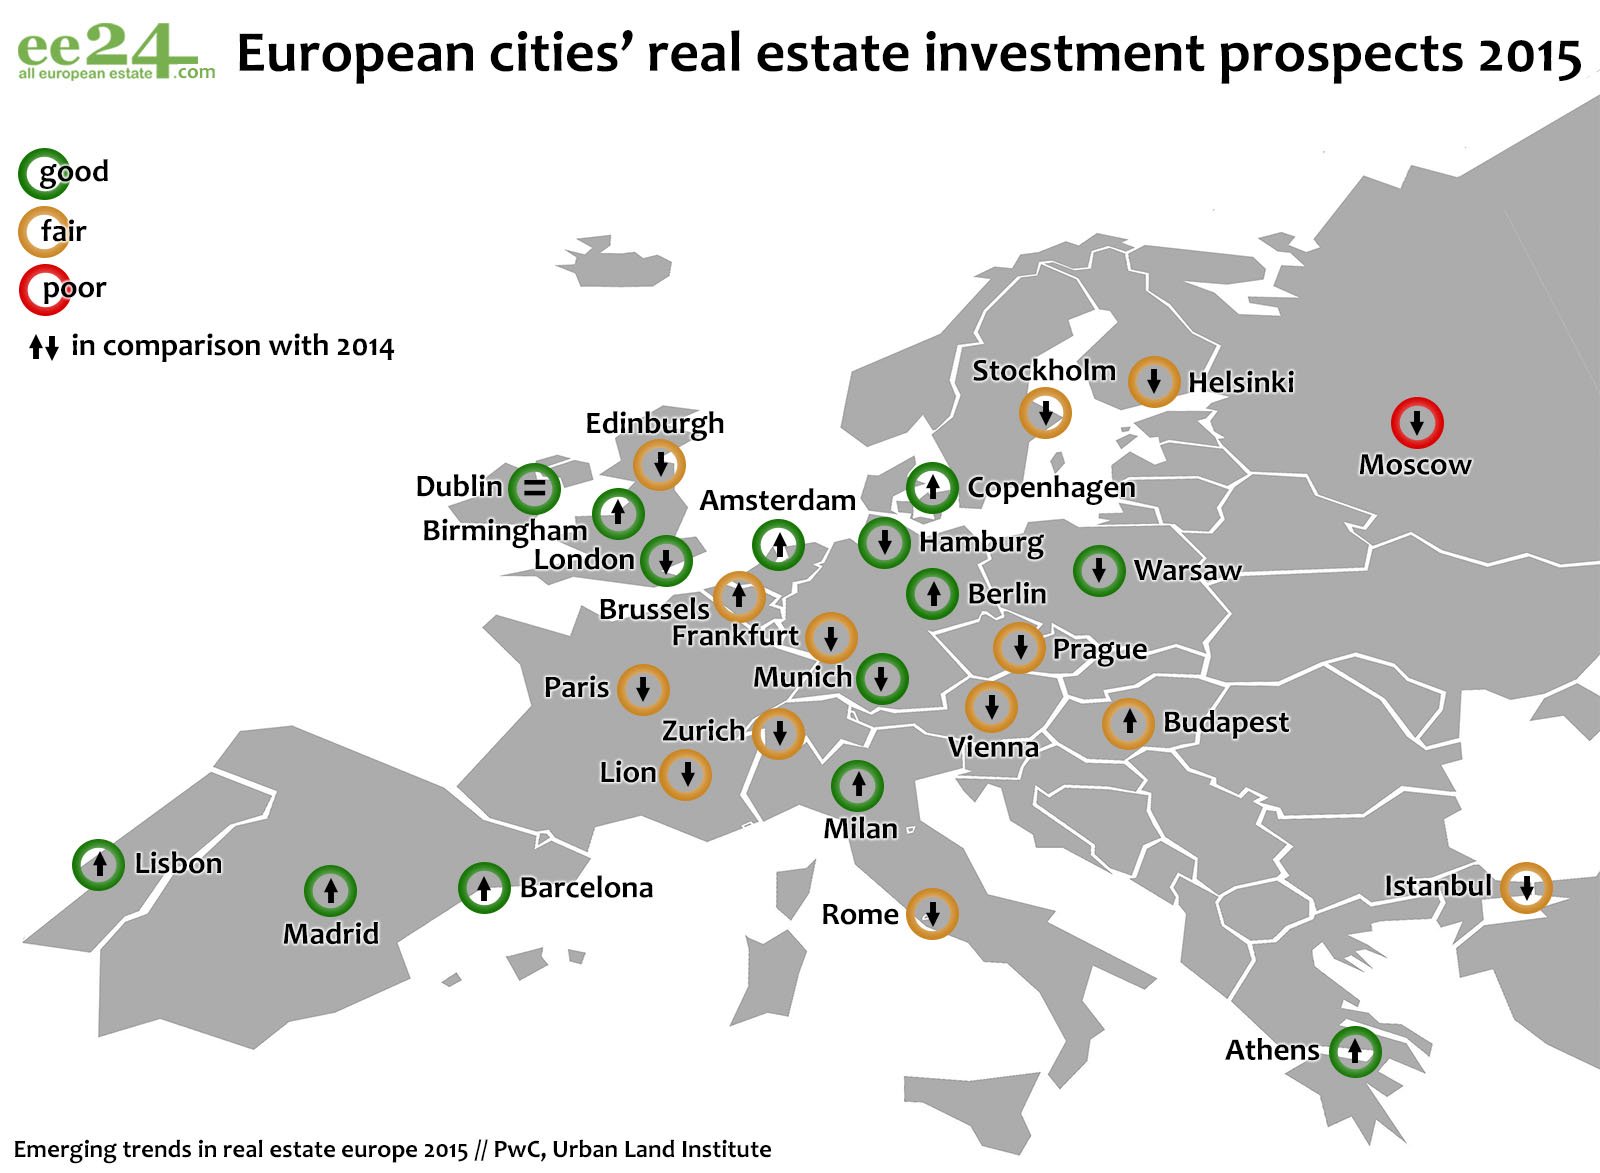 The best cities in Europe for real estate investments – 2015 | Photo 1 | ee24